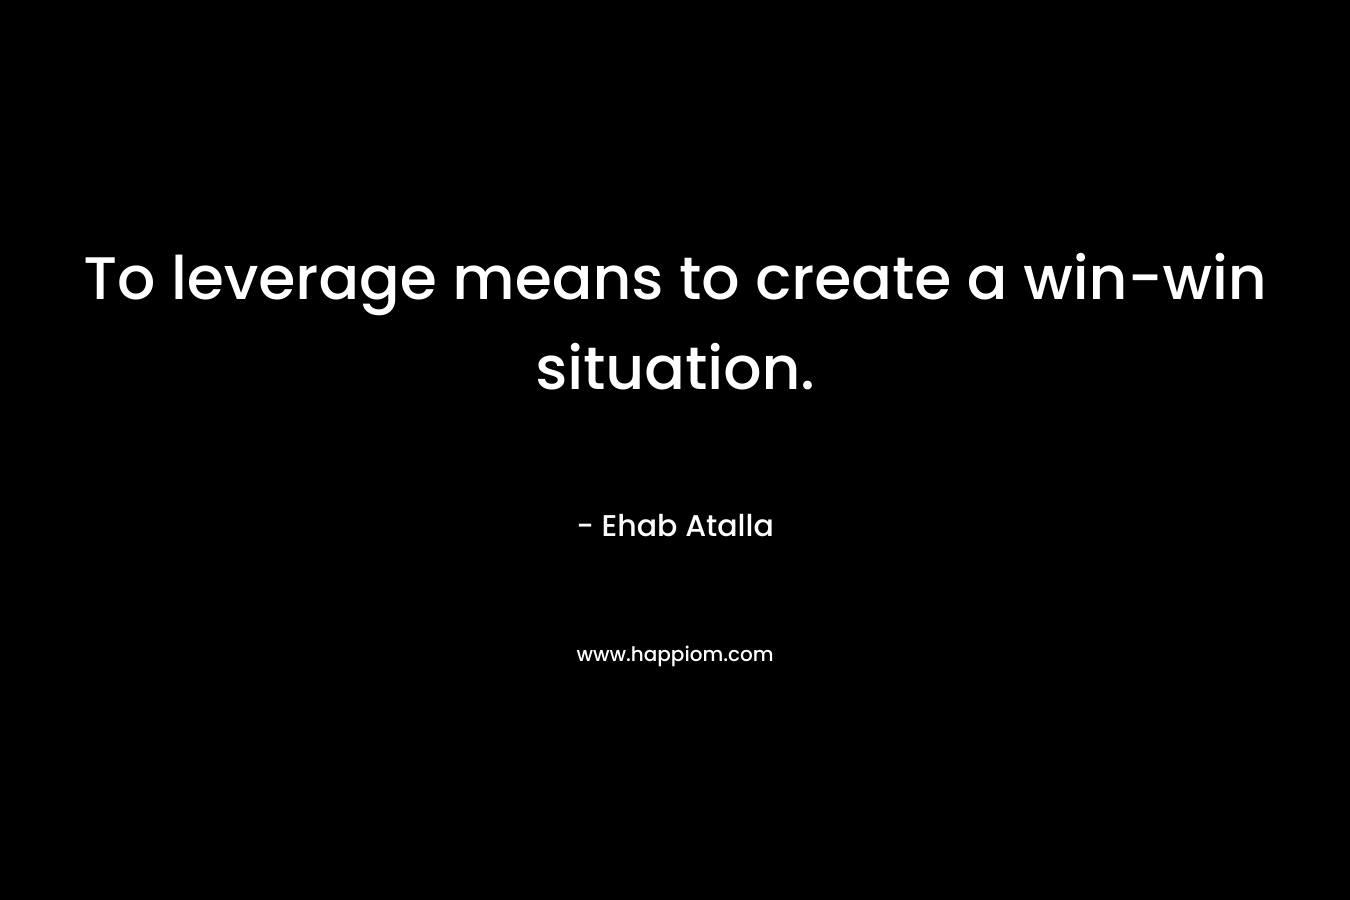 To leverage means to create a win-win situation. – Ehab Atalla